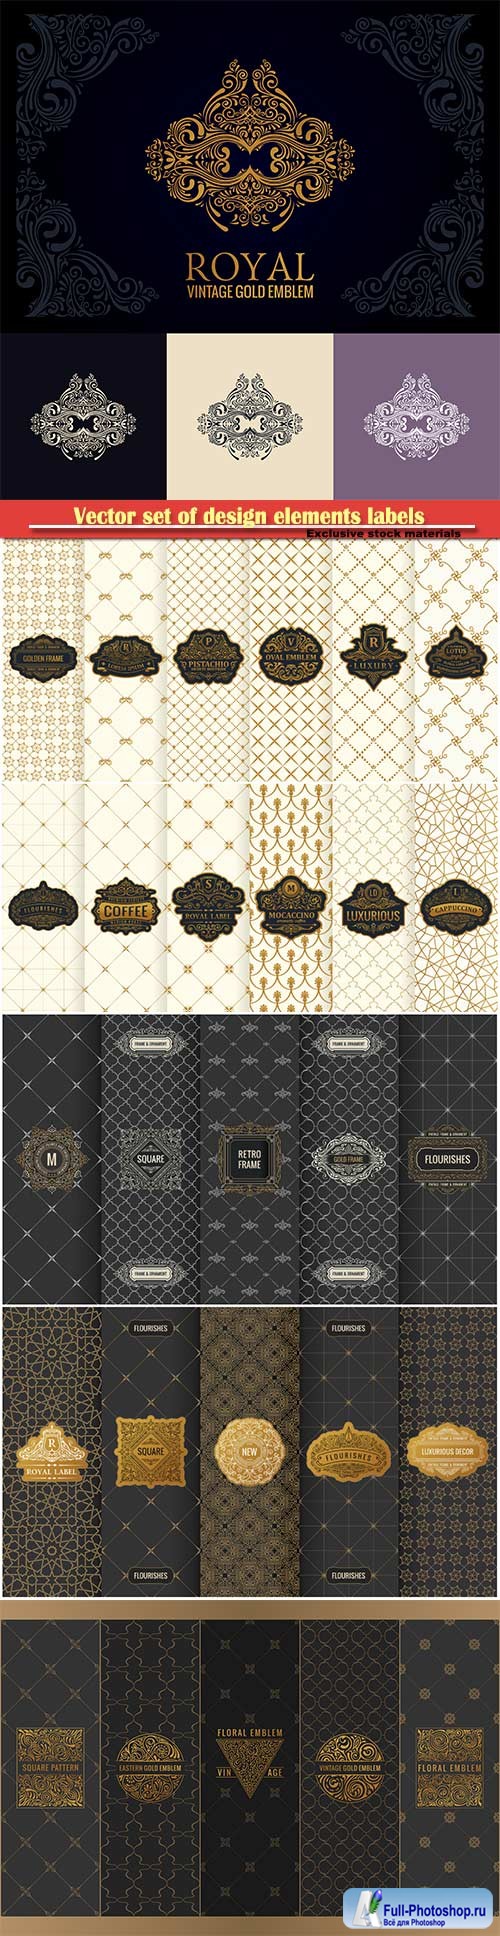 Vector set of design elements labels, icon, logo, frame, luxury packaging